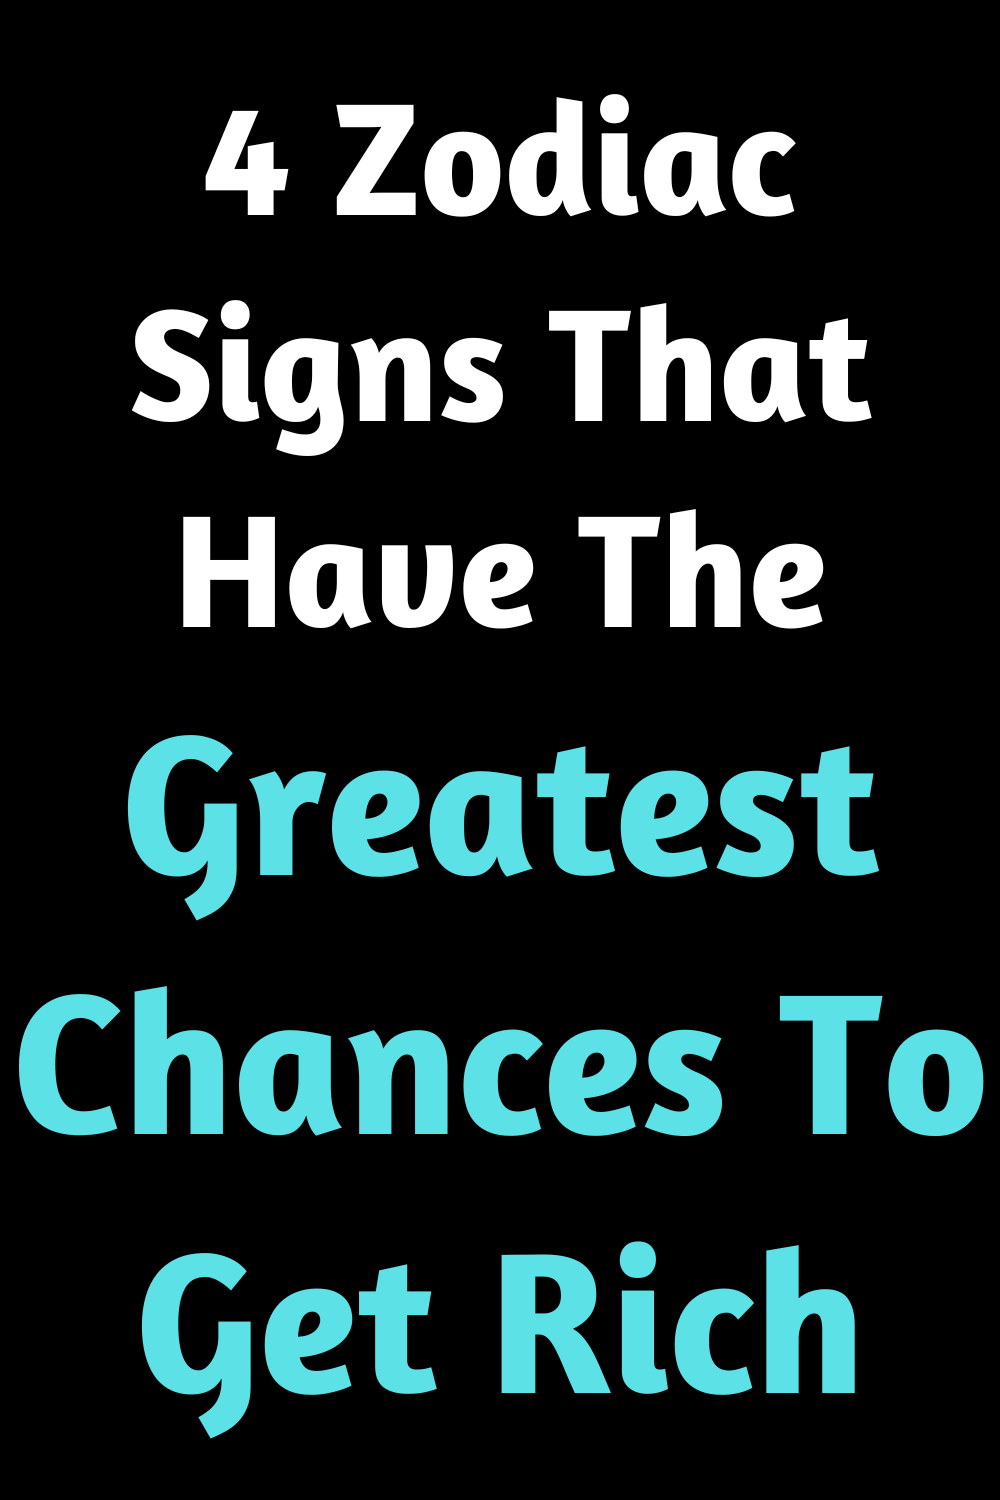 4 Zodiac Signs That Have The Greatest Chances To Get Rich